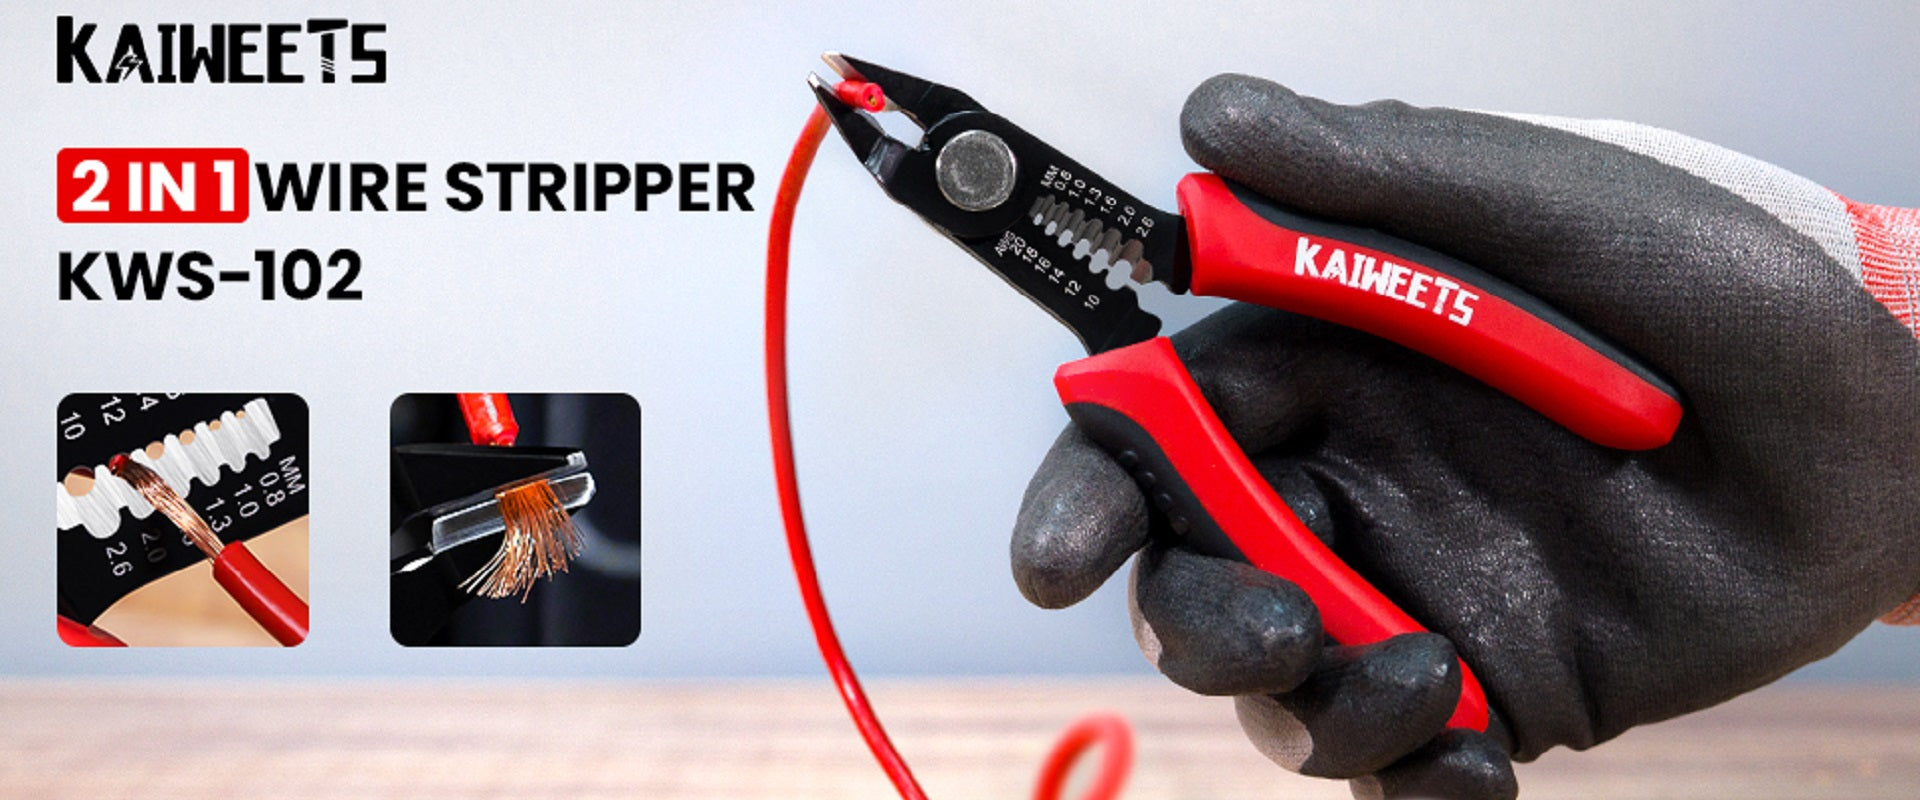 KAIWEETS KWS-101 Wire Stripper 10-20 AWG Cable Cutter Stripping Tool